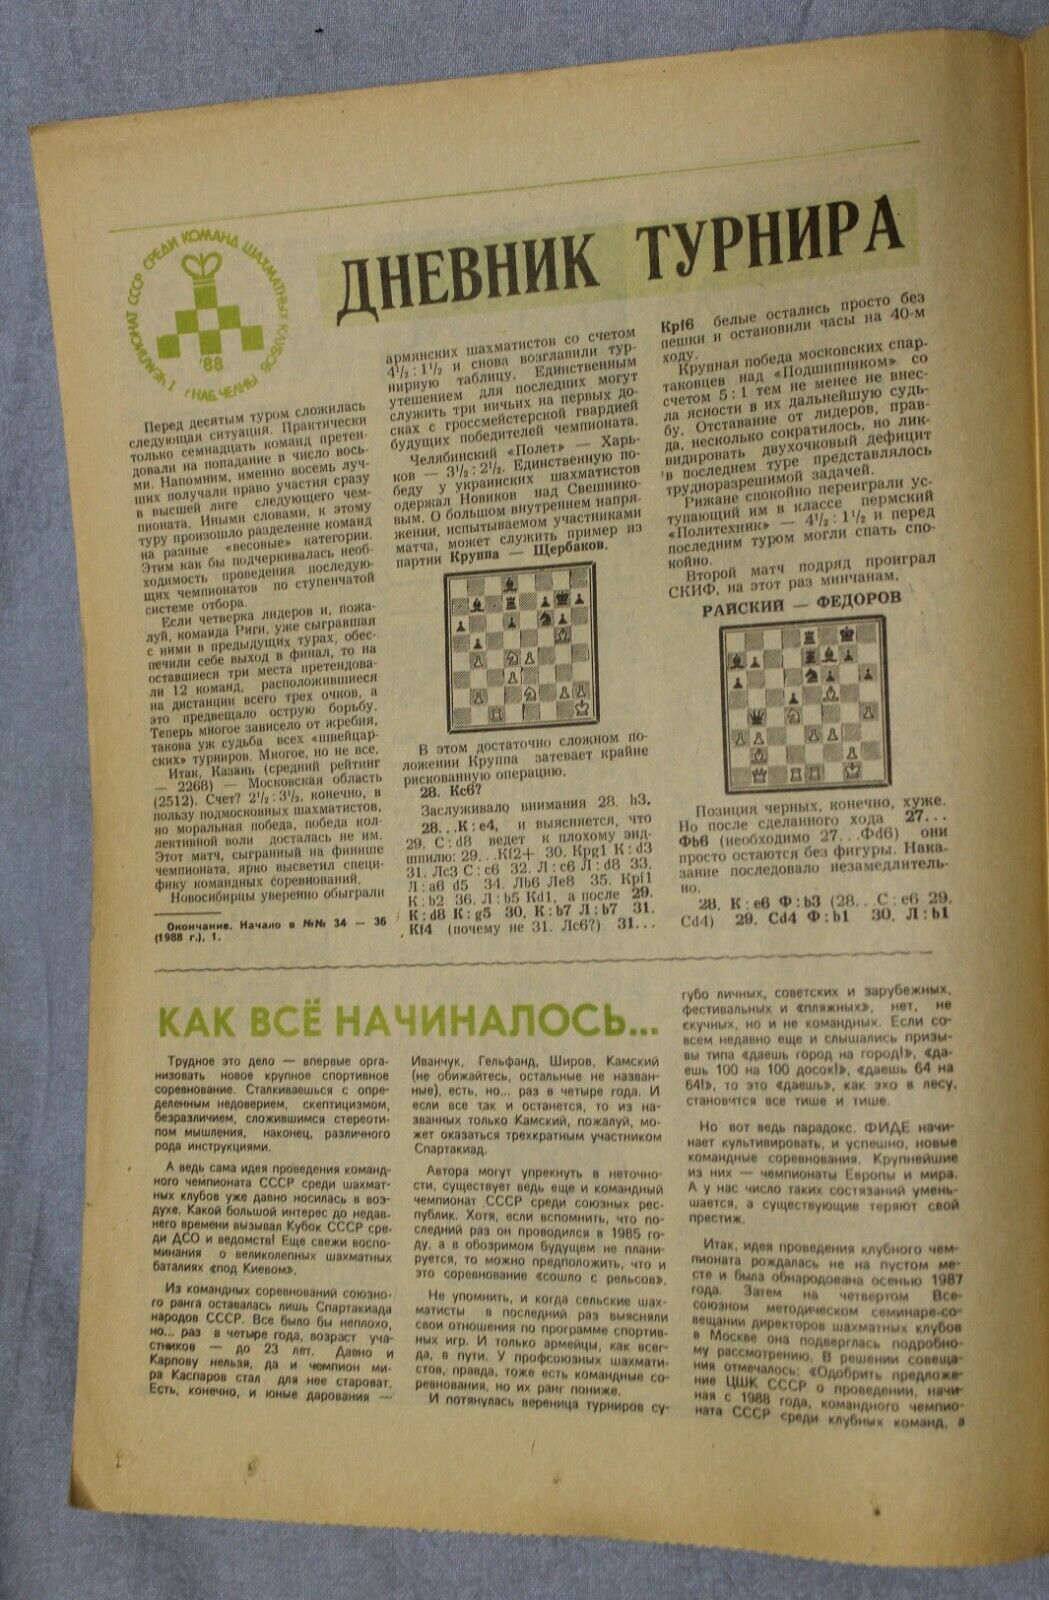 11253.Complete set of Bulletin Central Chess Club USSR Full Annual Set, 36 Issues 1989